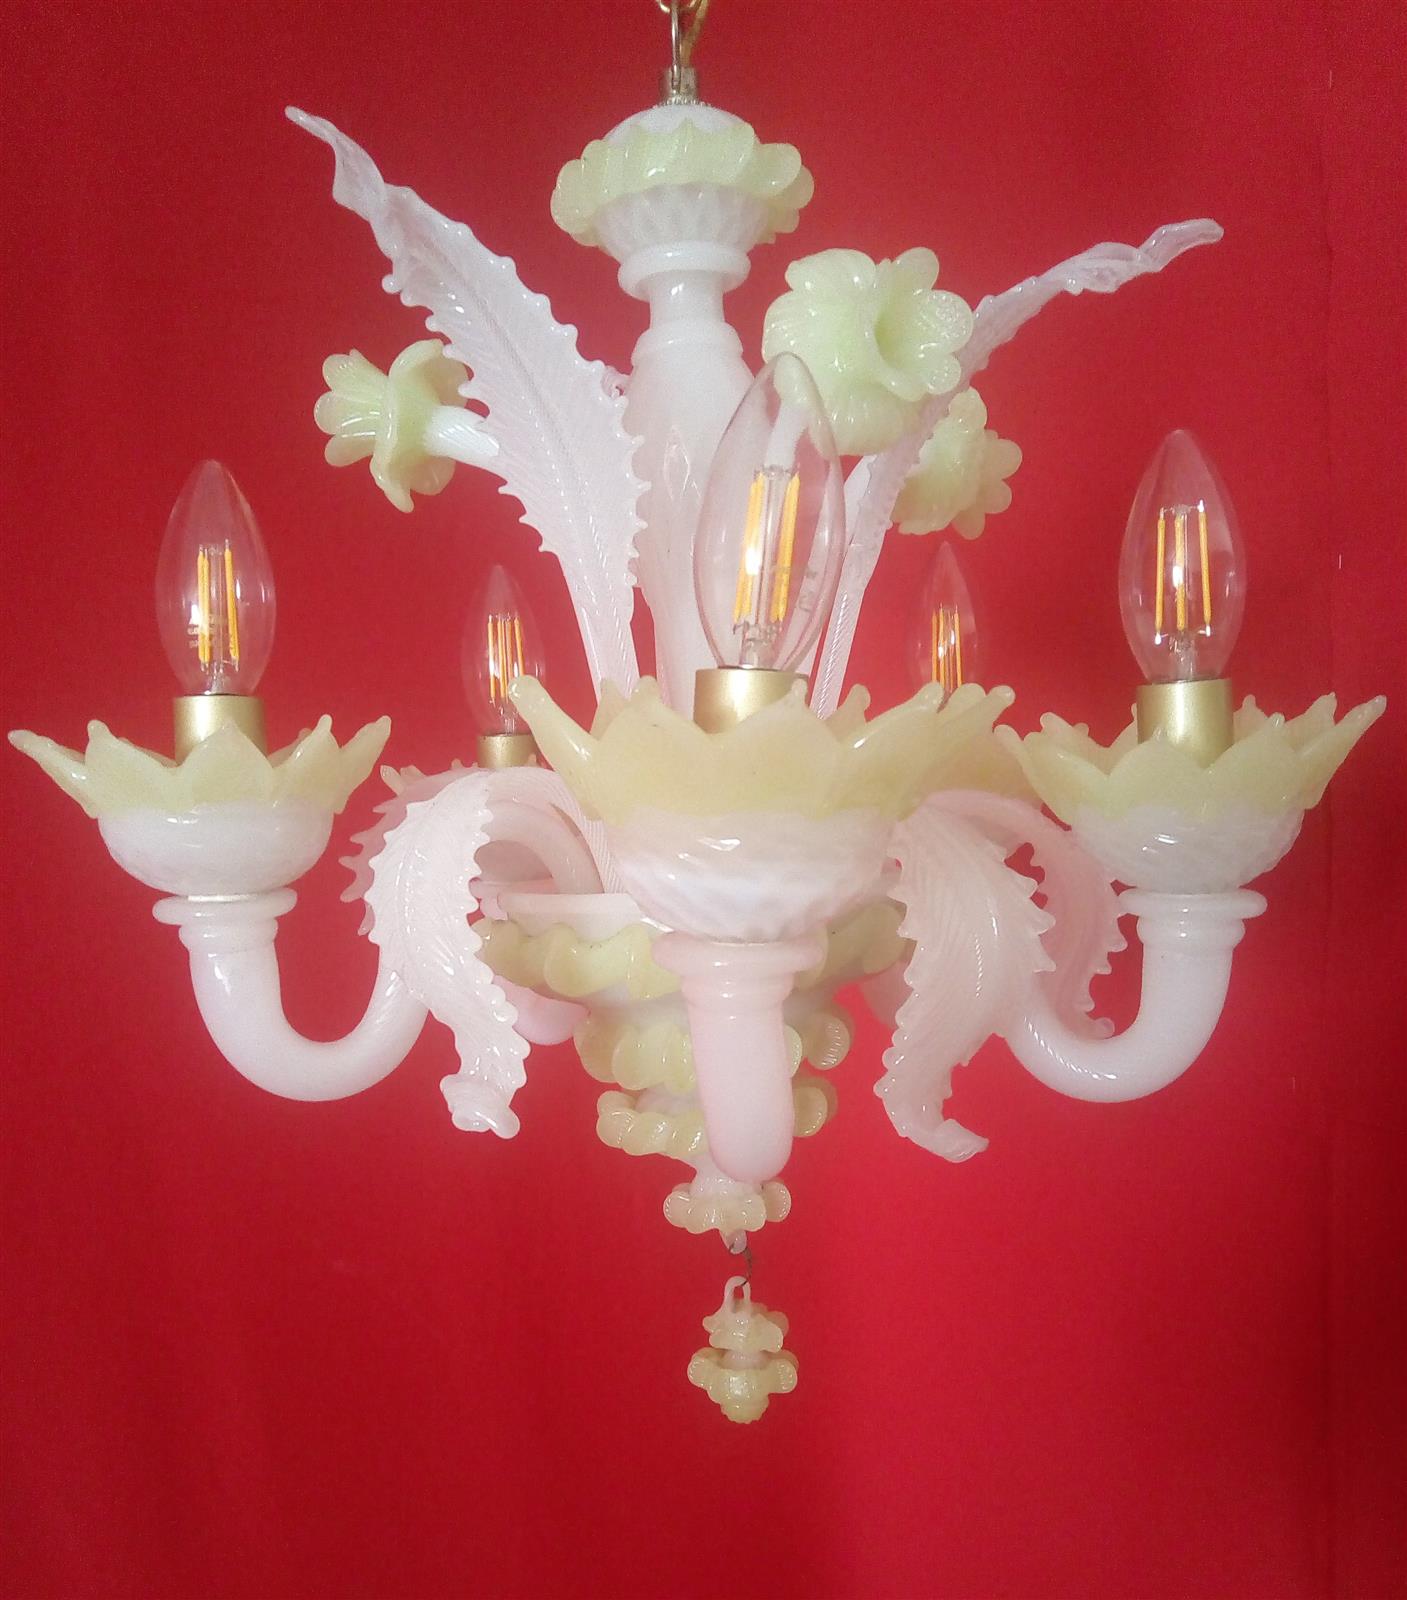 Small chandelier in white and green opaline glass